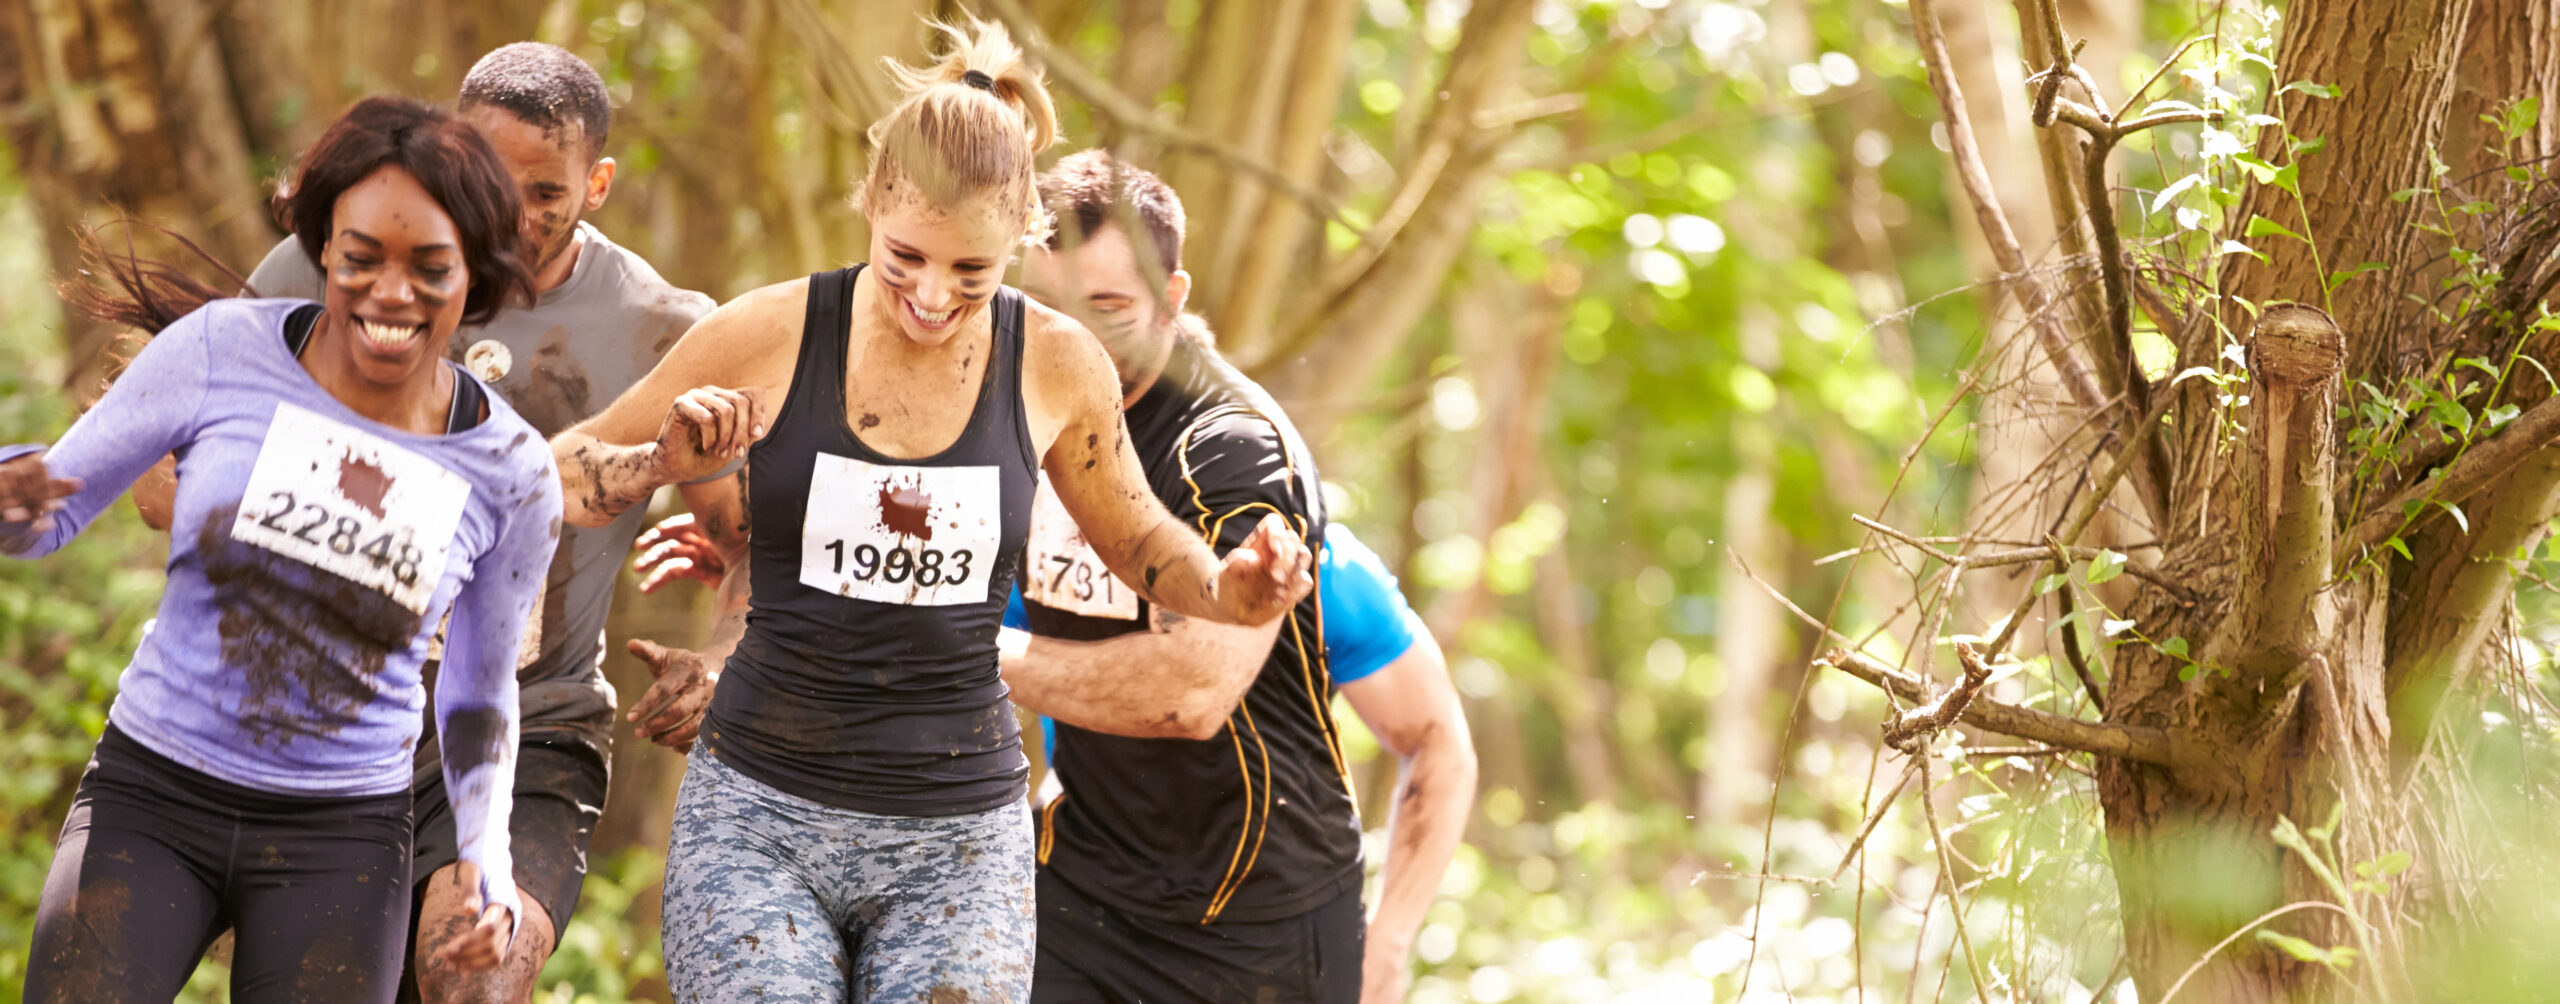 Competitors running in a forest at an endurance event